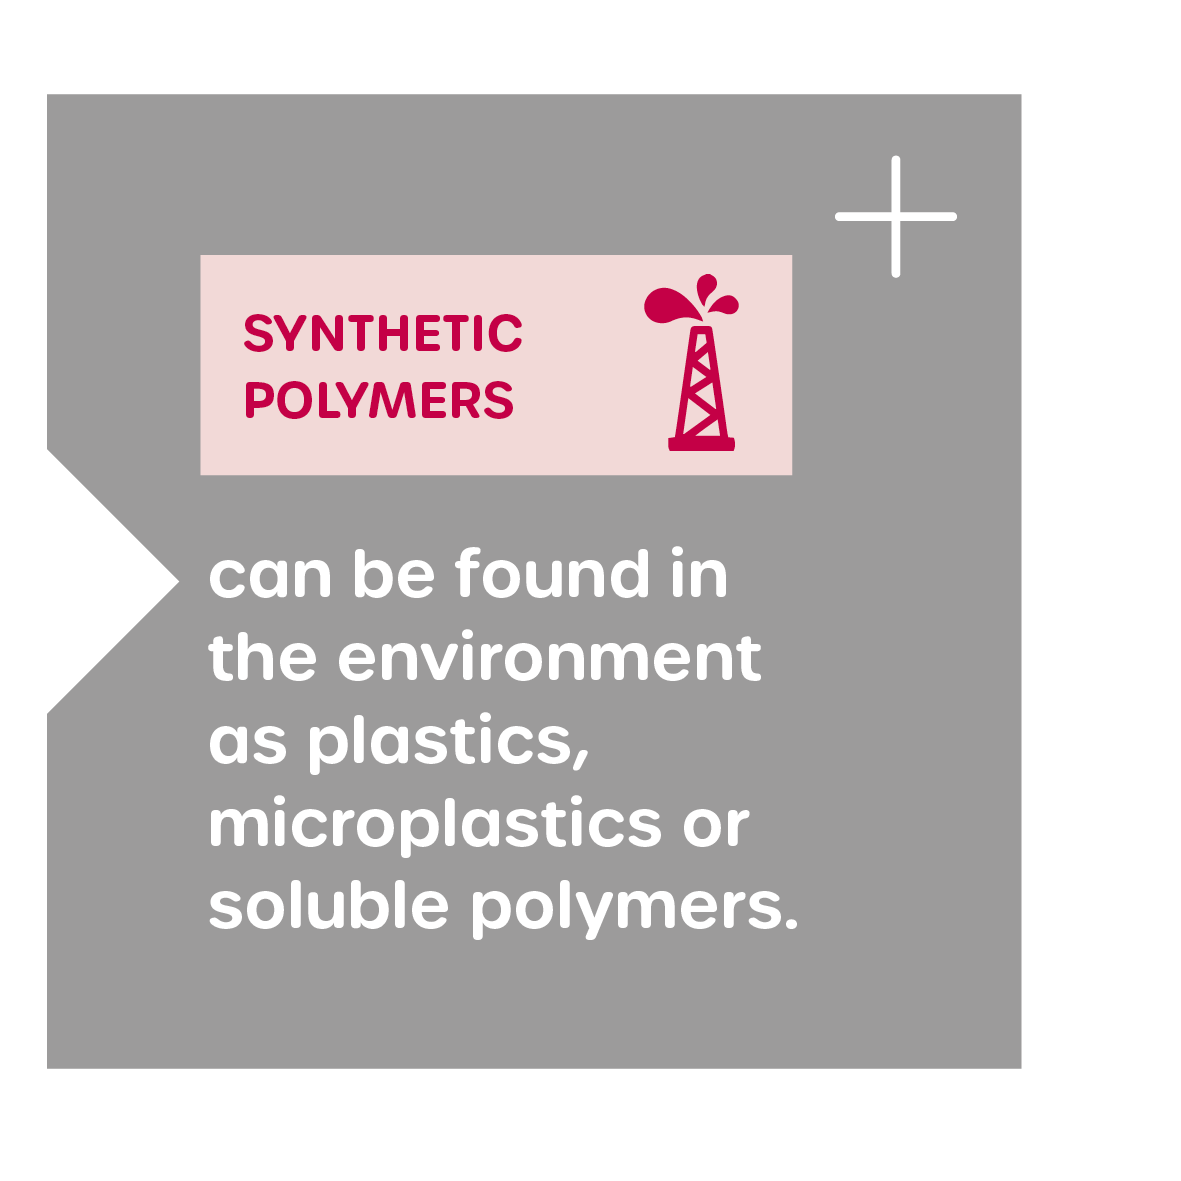 Definition: Synthetic polmyers